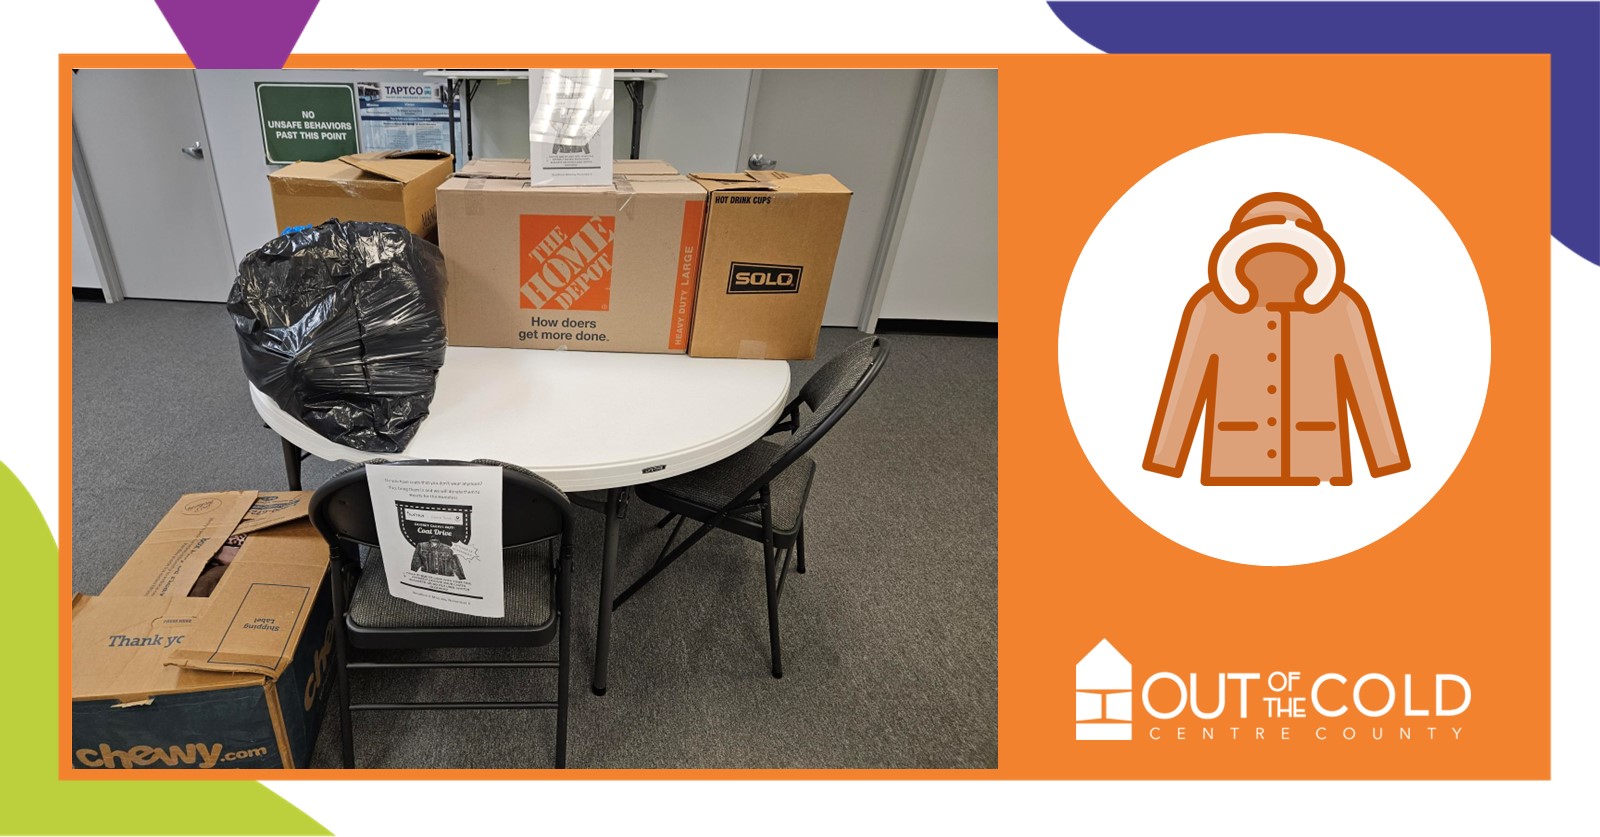 MTM Transit is spreading warmth this winter! Our team in State College collected five boxes of winter coats for Out of the Cold: Centre County shelter. Read more about how we're keeping the spirit of giving alive this season.